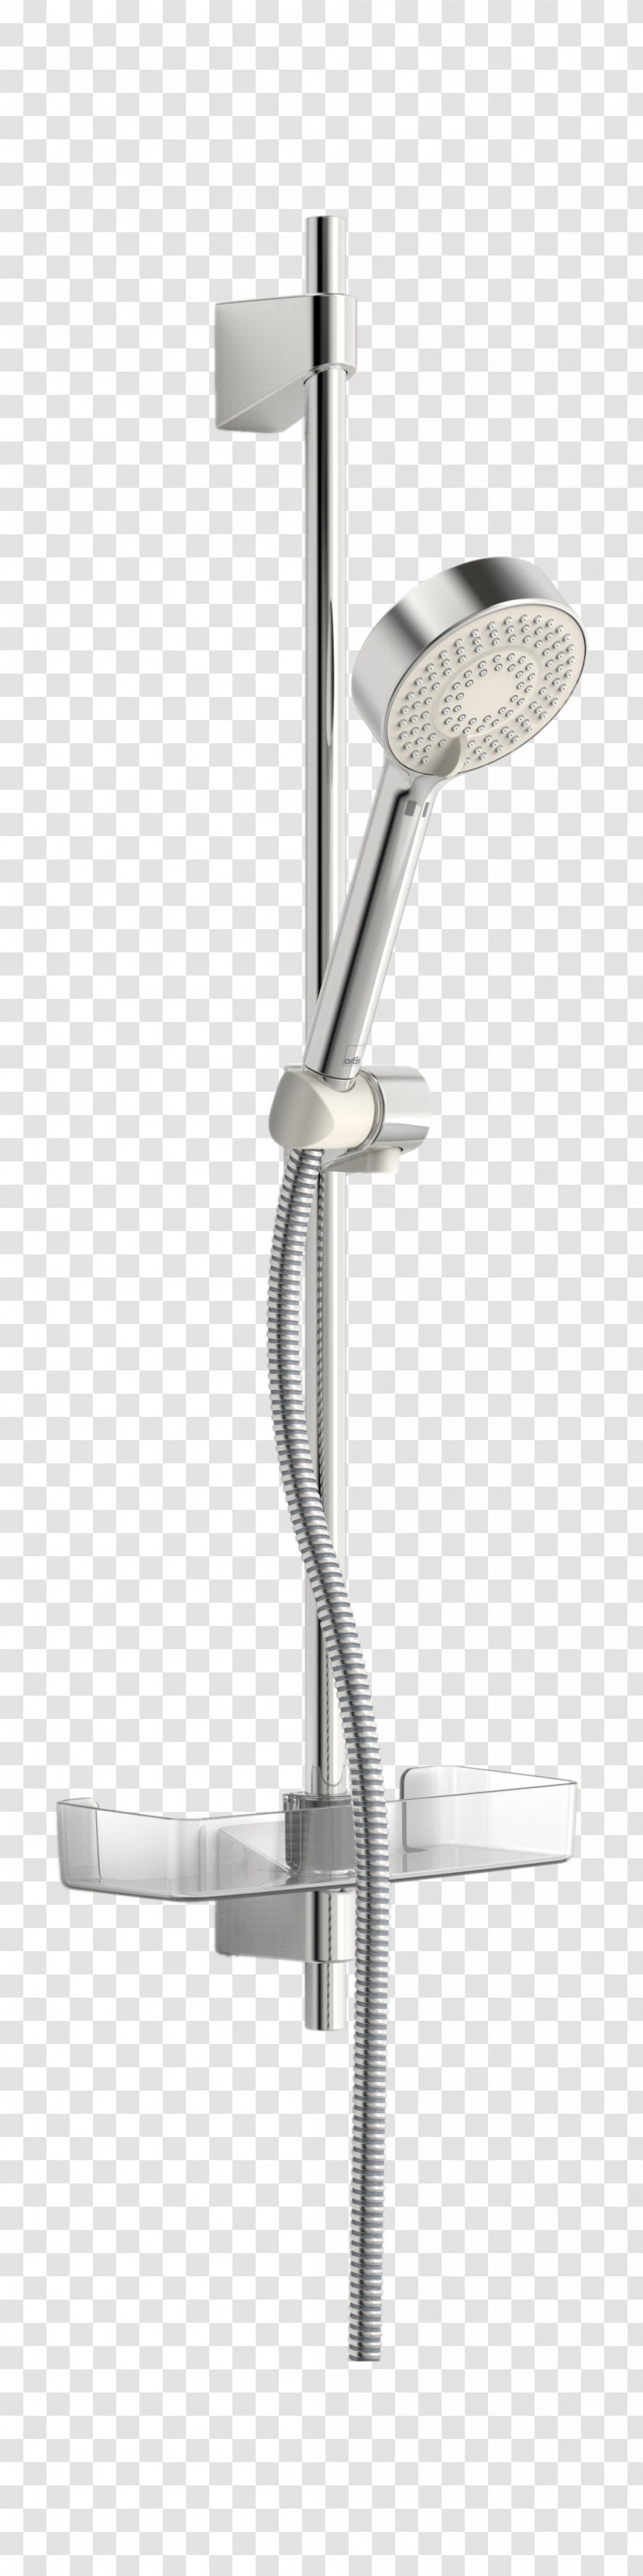 Oras Shower Bathroom Finland .fi - Price - Products Renderings Transparent PNG